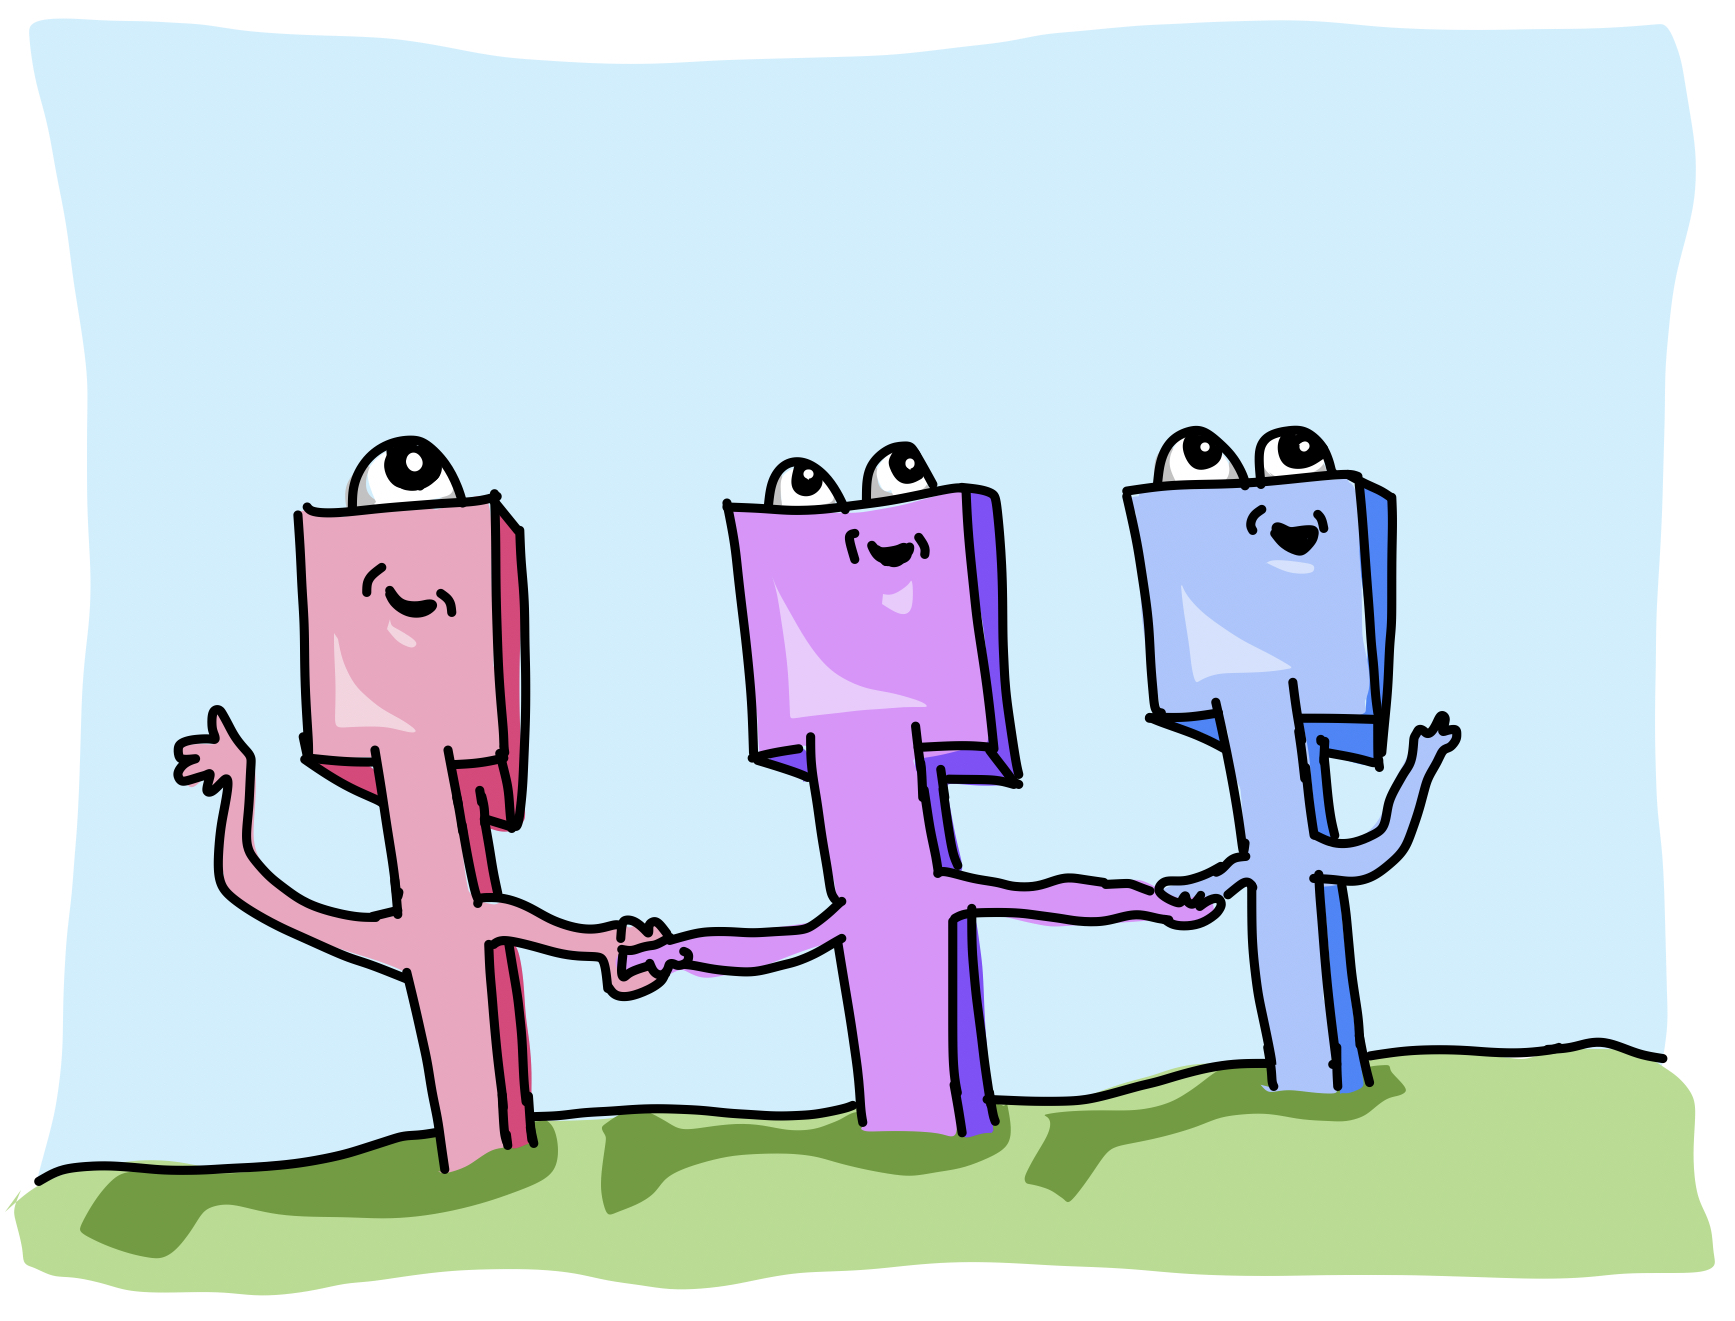 Three monsters with square heads that are holding hands and growing out of the earth